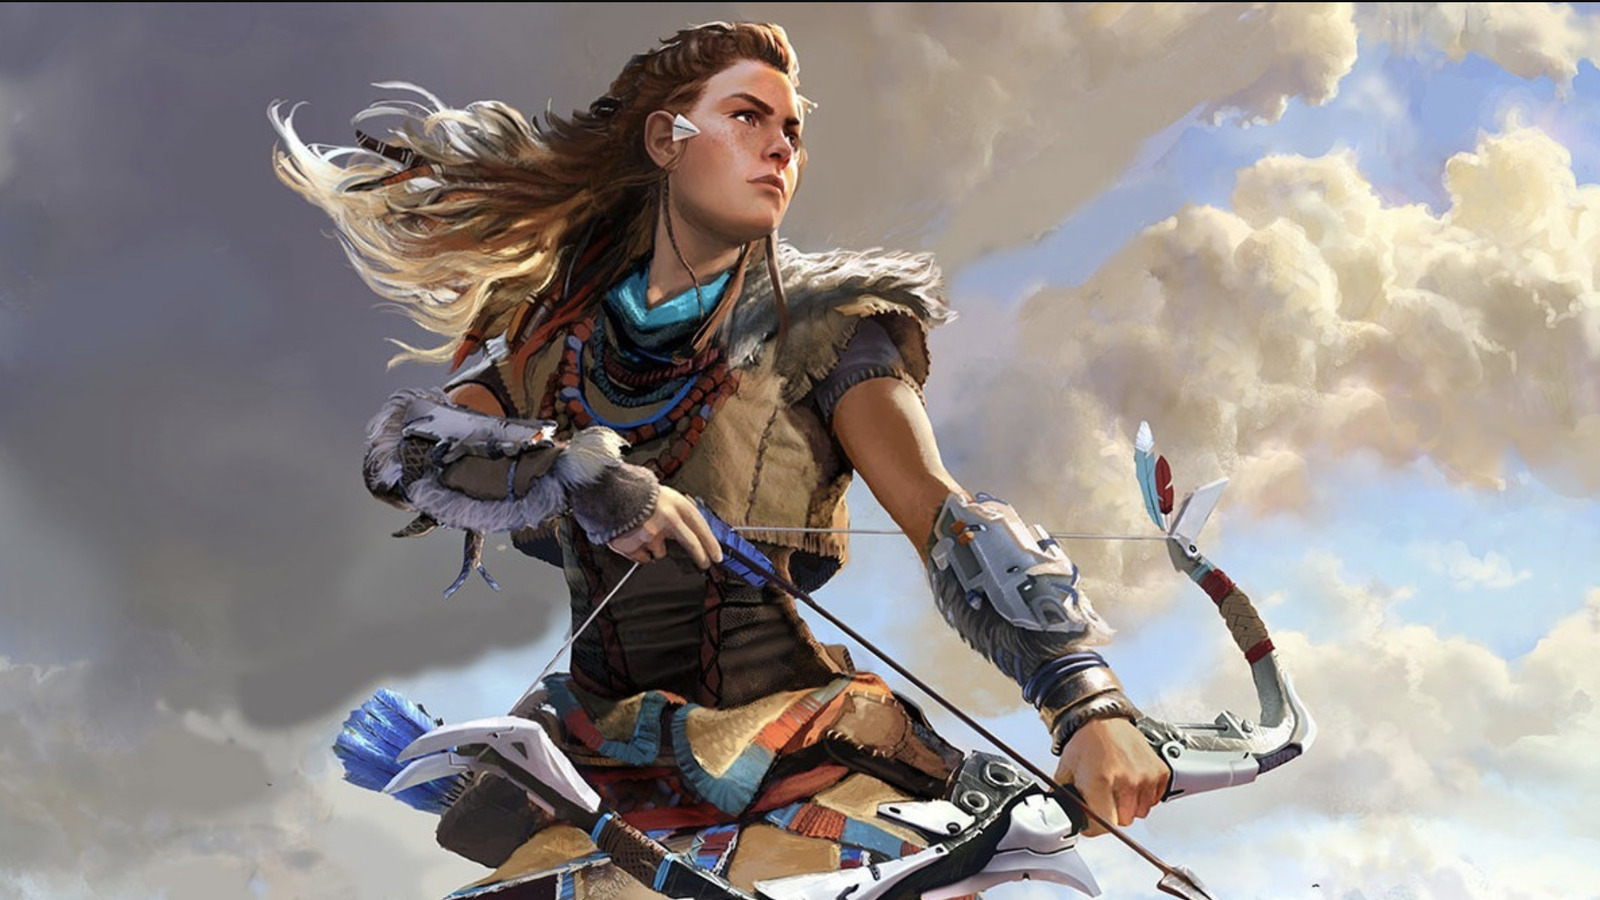 5 actors we would love to see play Aloy in Netflix’s Horizon series